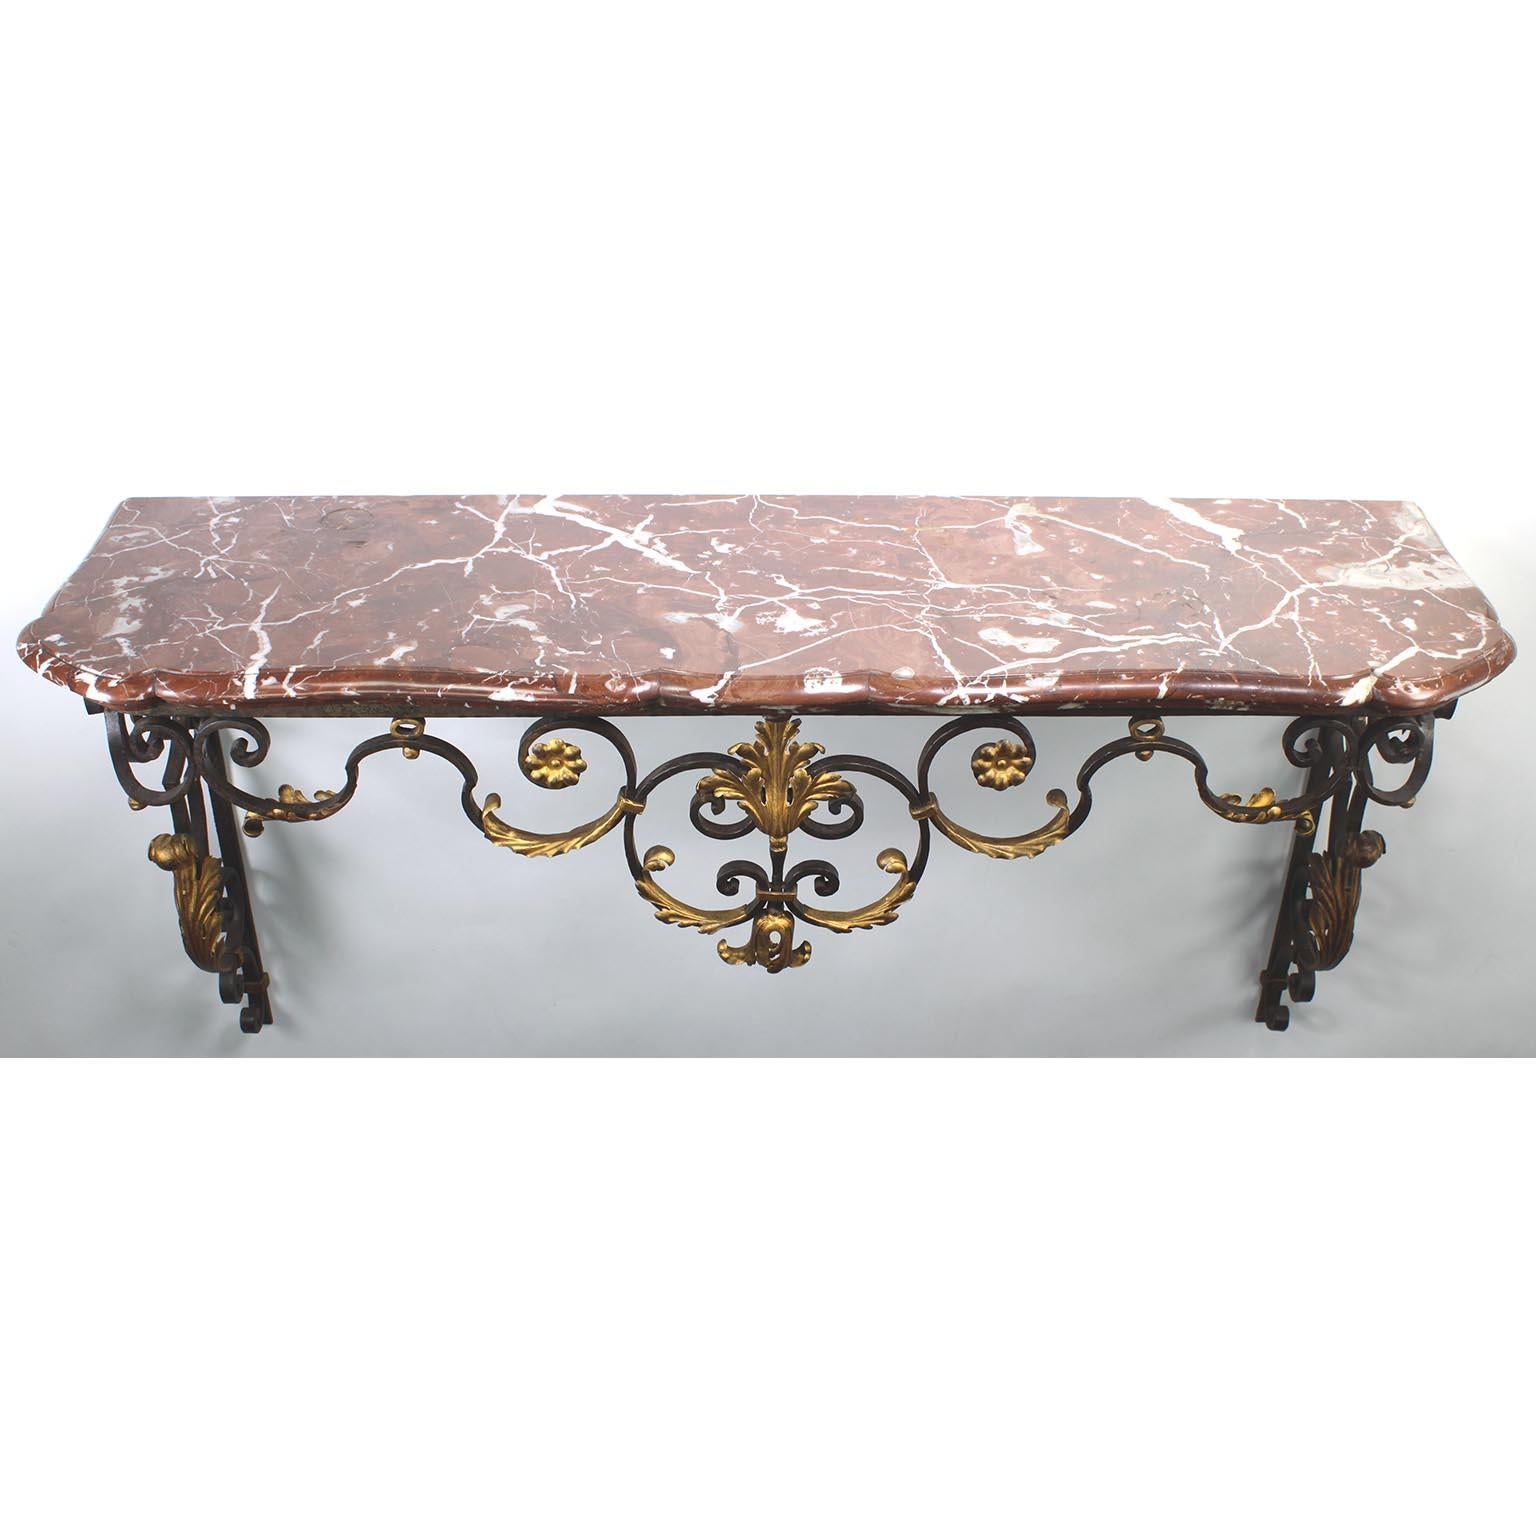 A French Louis XV Style Wrought Iron Wall-Mounting Console with Marble Top. The scrolled slight serpentine wrought iron scrolled frame with its original finish and parcel-gilt acanthus and leaves, fitted with a veined Rouge Royal marble top, circa